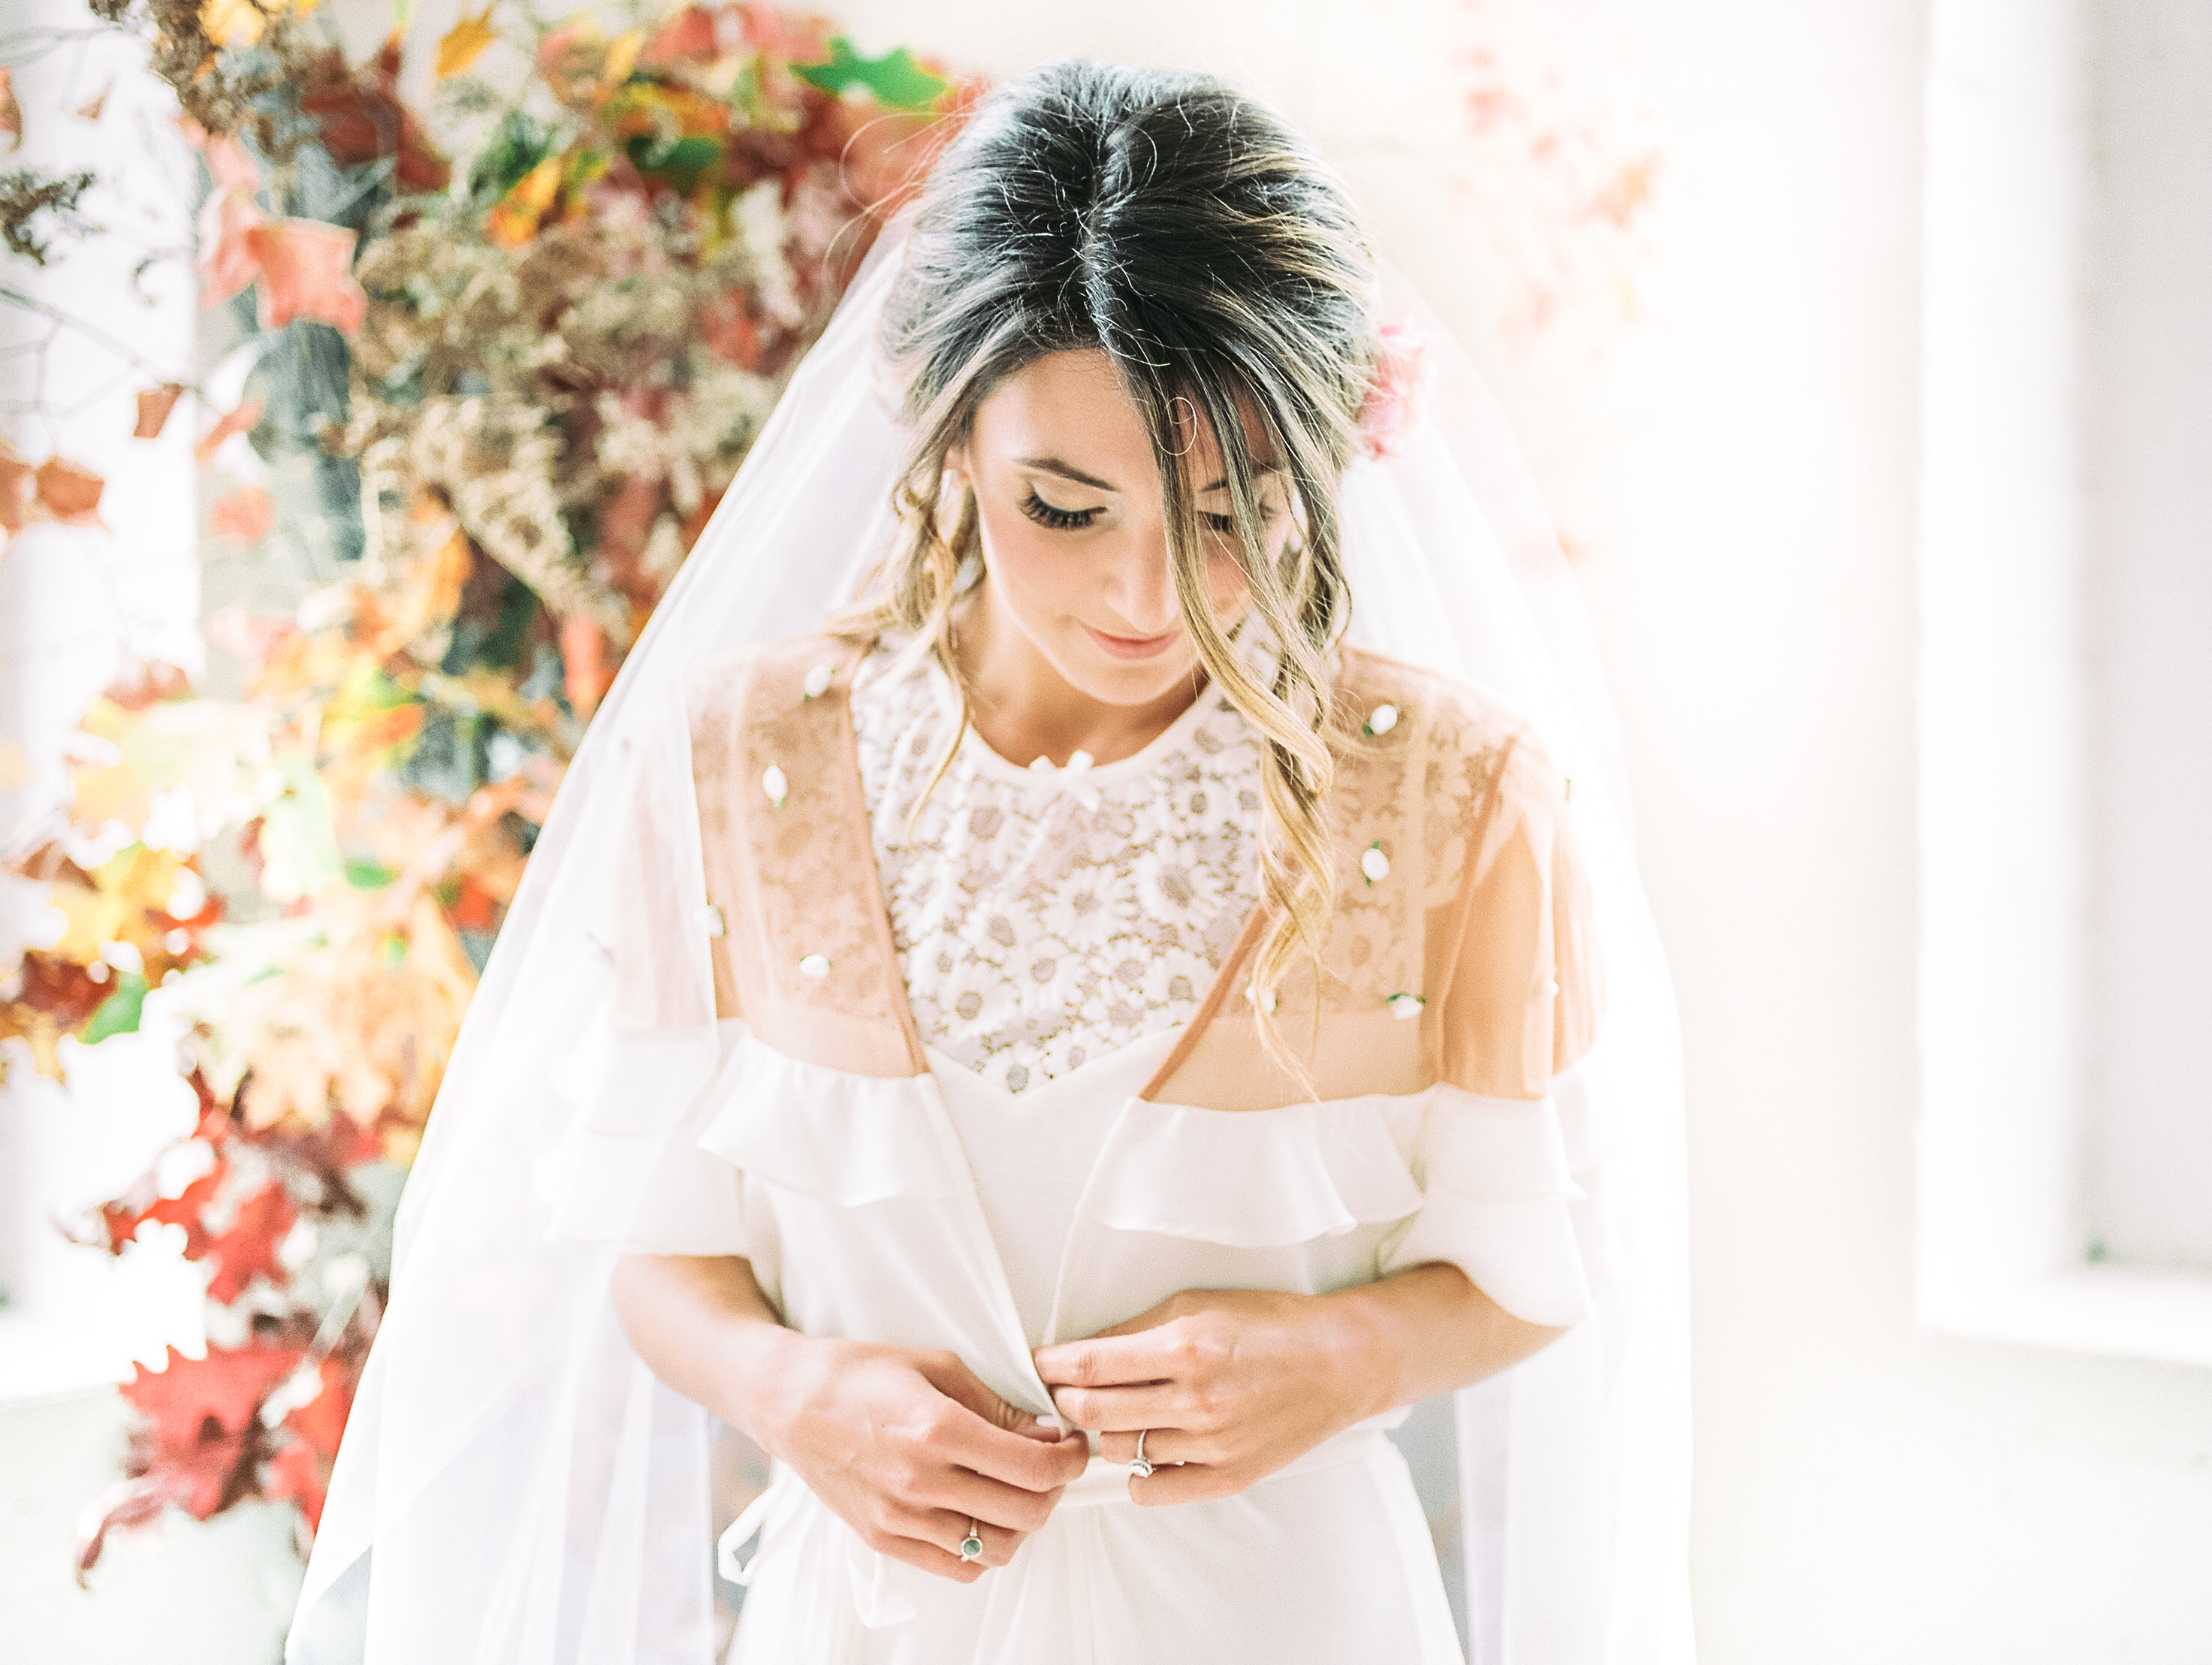 Bridal Robe | The Day's Design | Samantha James Phtoography